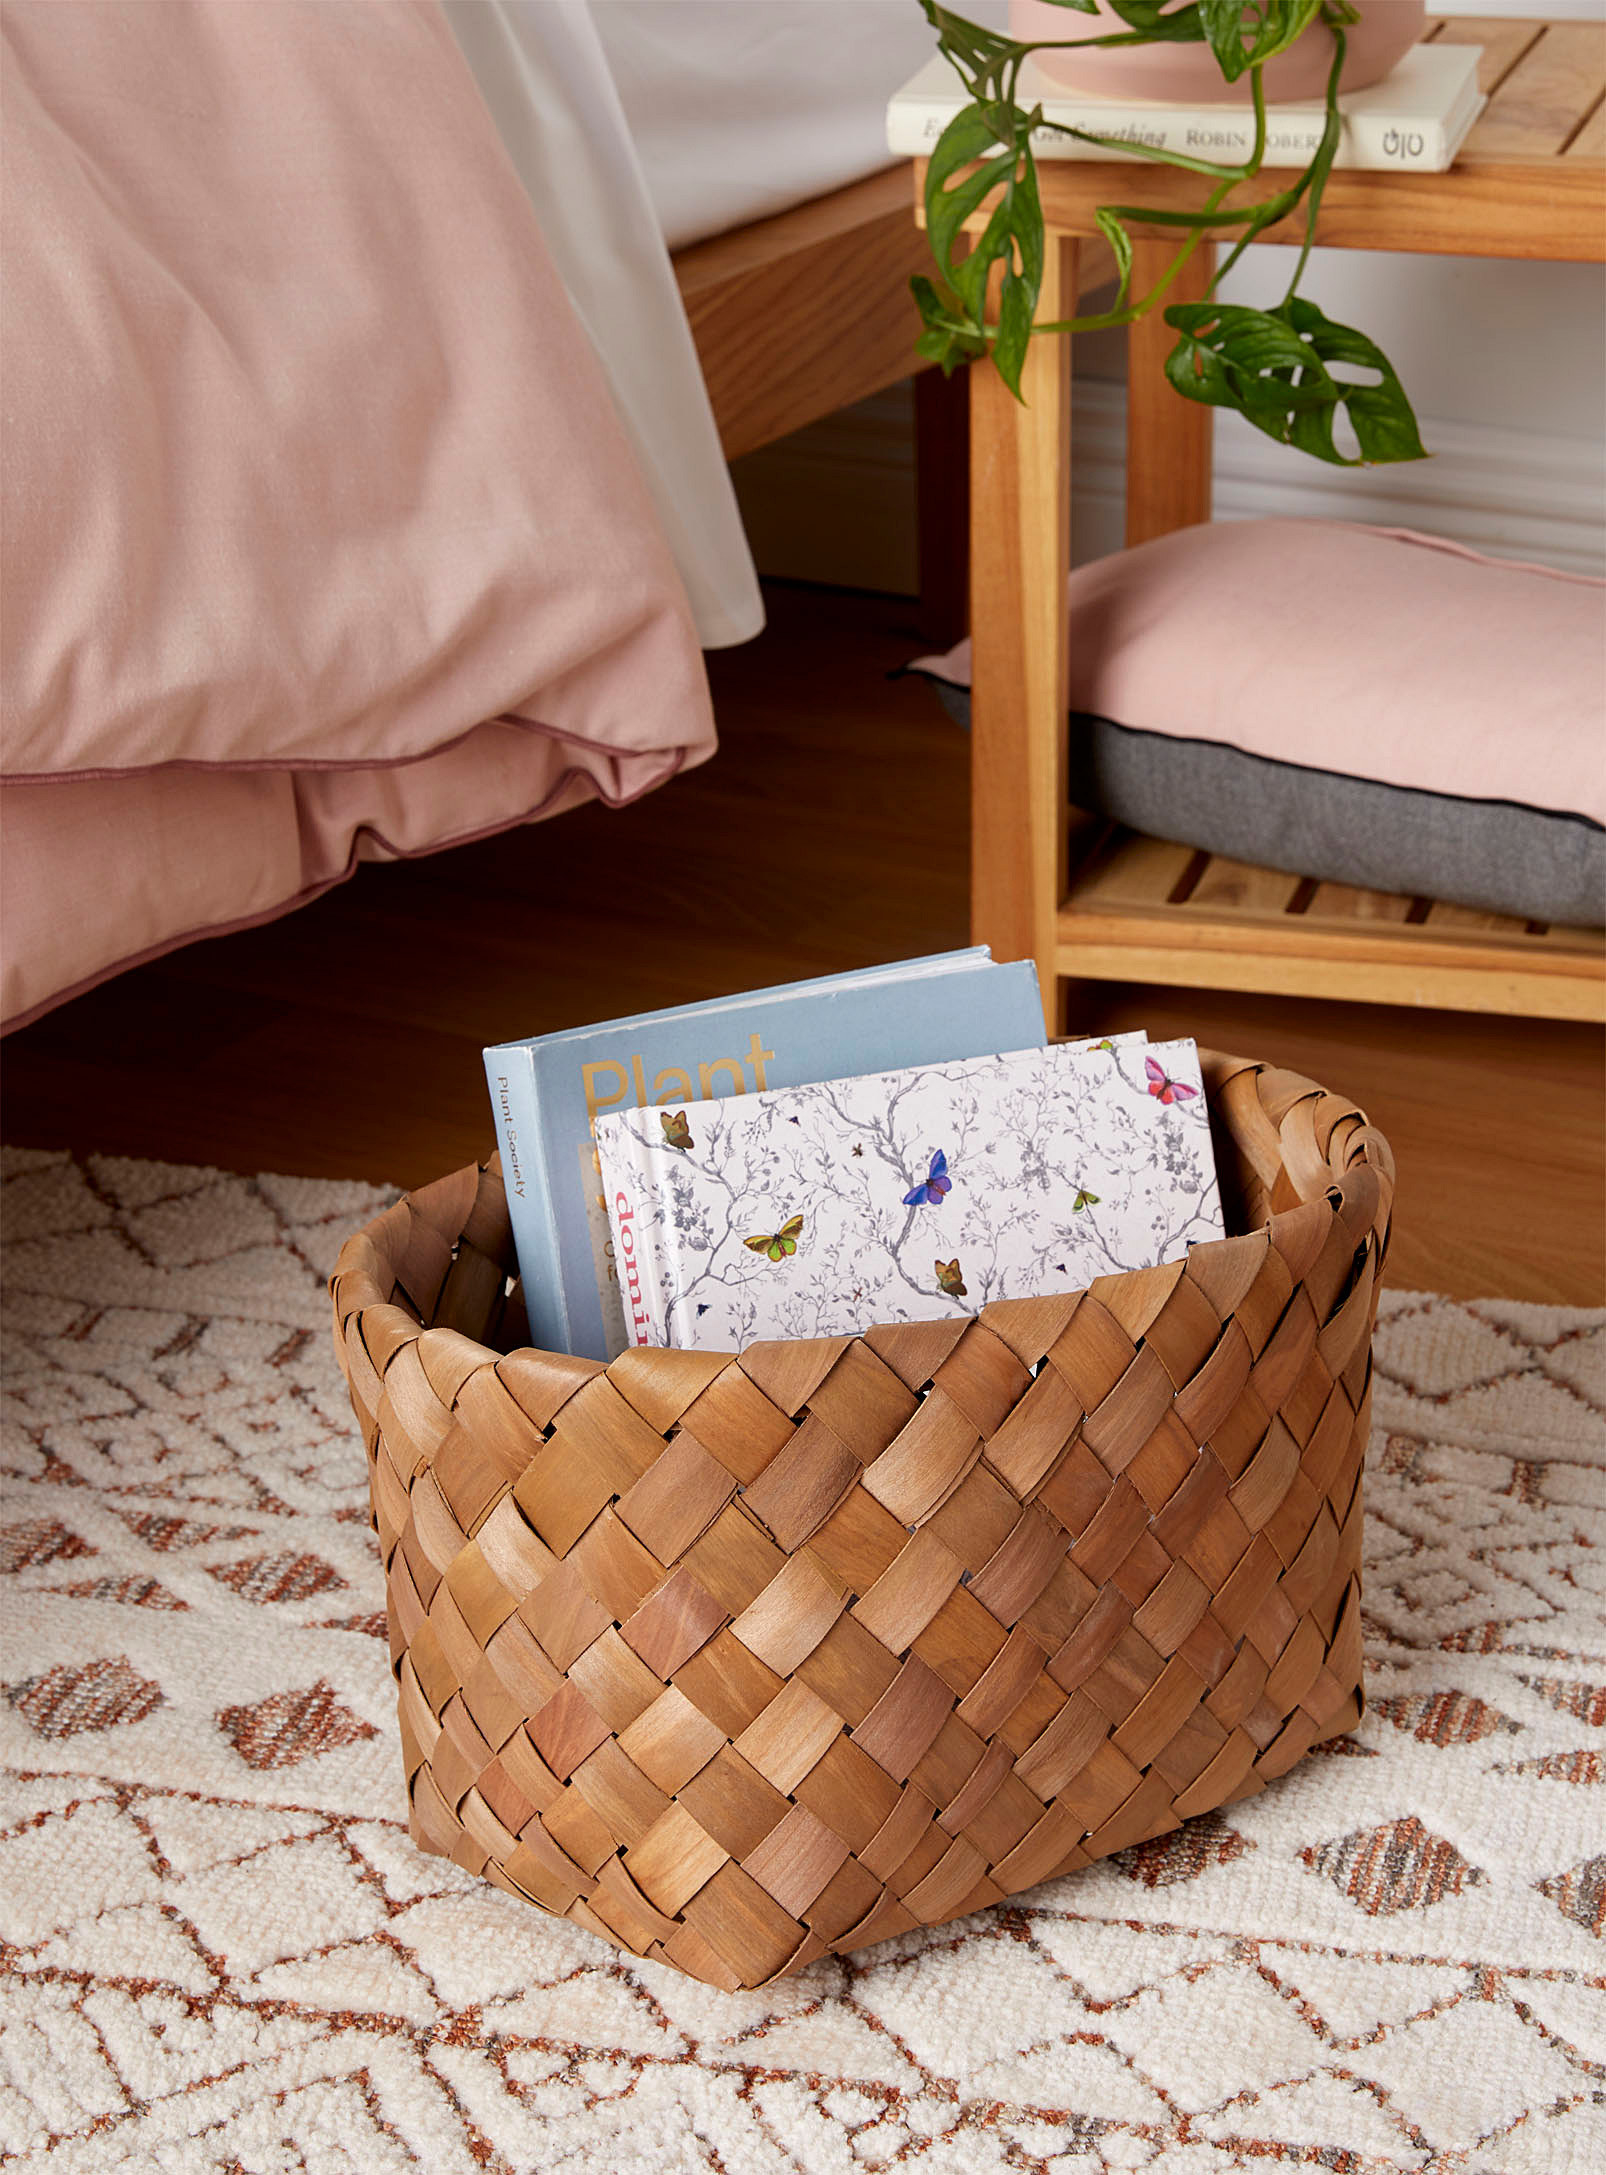 A woven basket on a rug filled with books